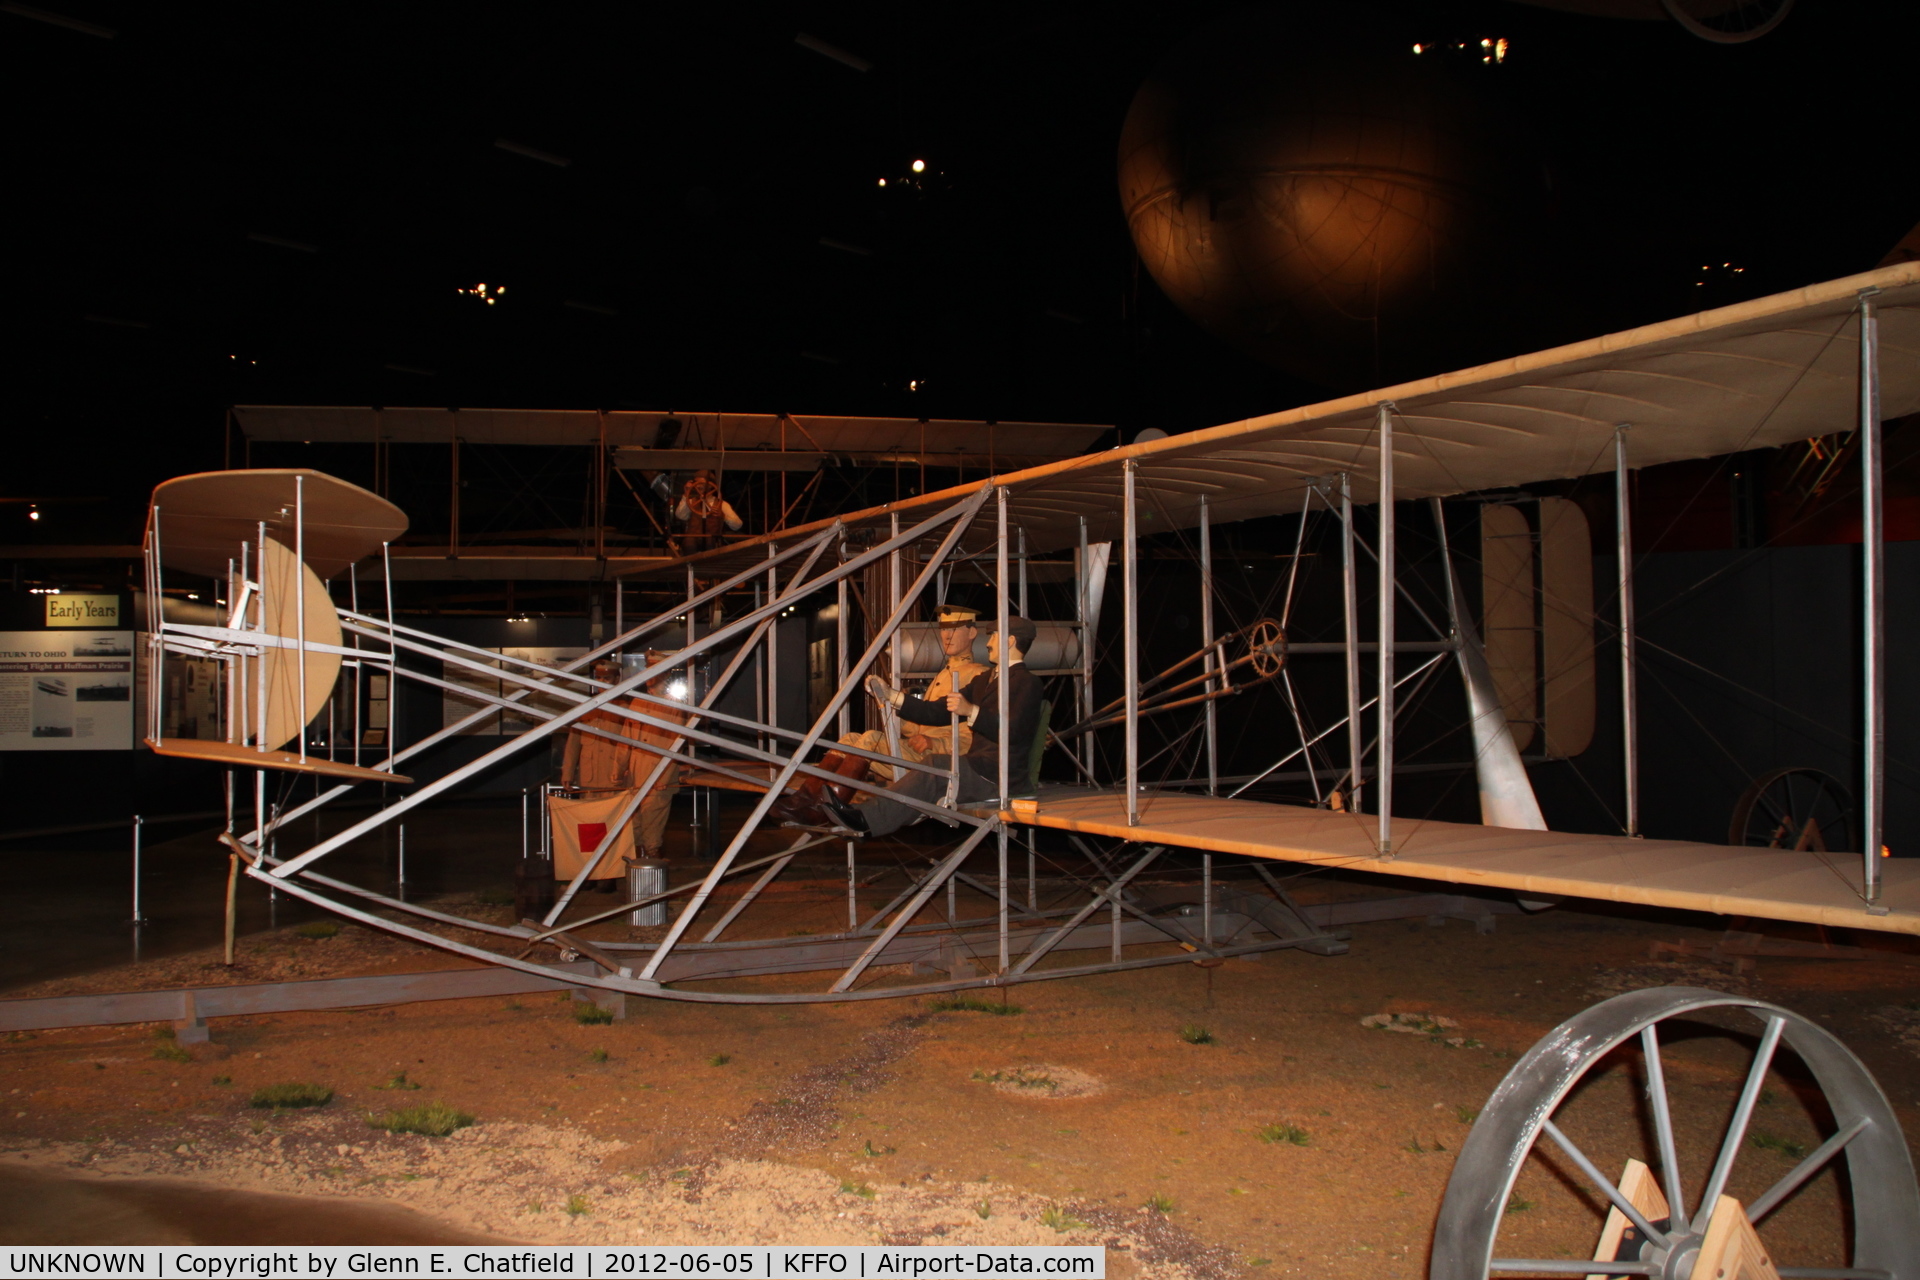 UNKNOWN, 1955 Wright 1909 Military Flyer C/N unknown, At the Air Force Museum.  Replica 1909 Military Flyer built by museum personnel in 1955, using engine donated by Orville Wright, and chains, sprockets and propellers donated by heirs of the Wright estate.